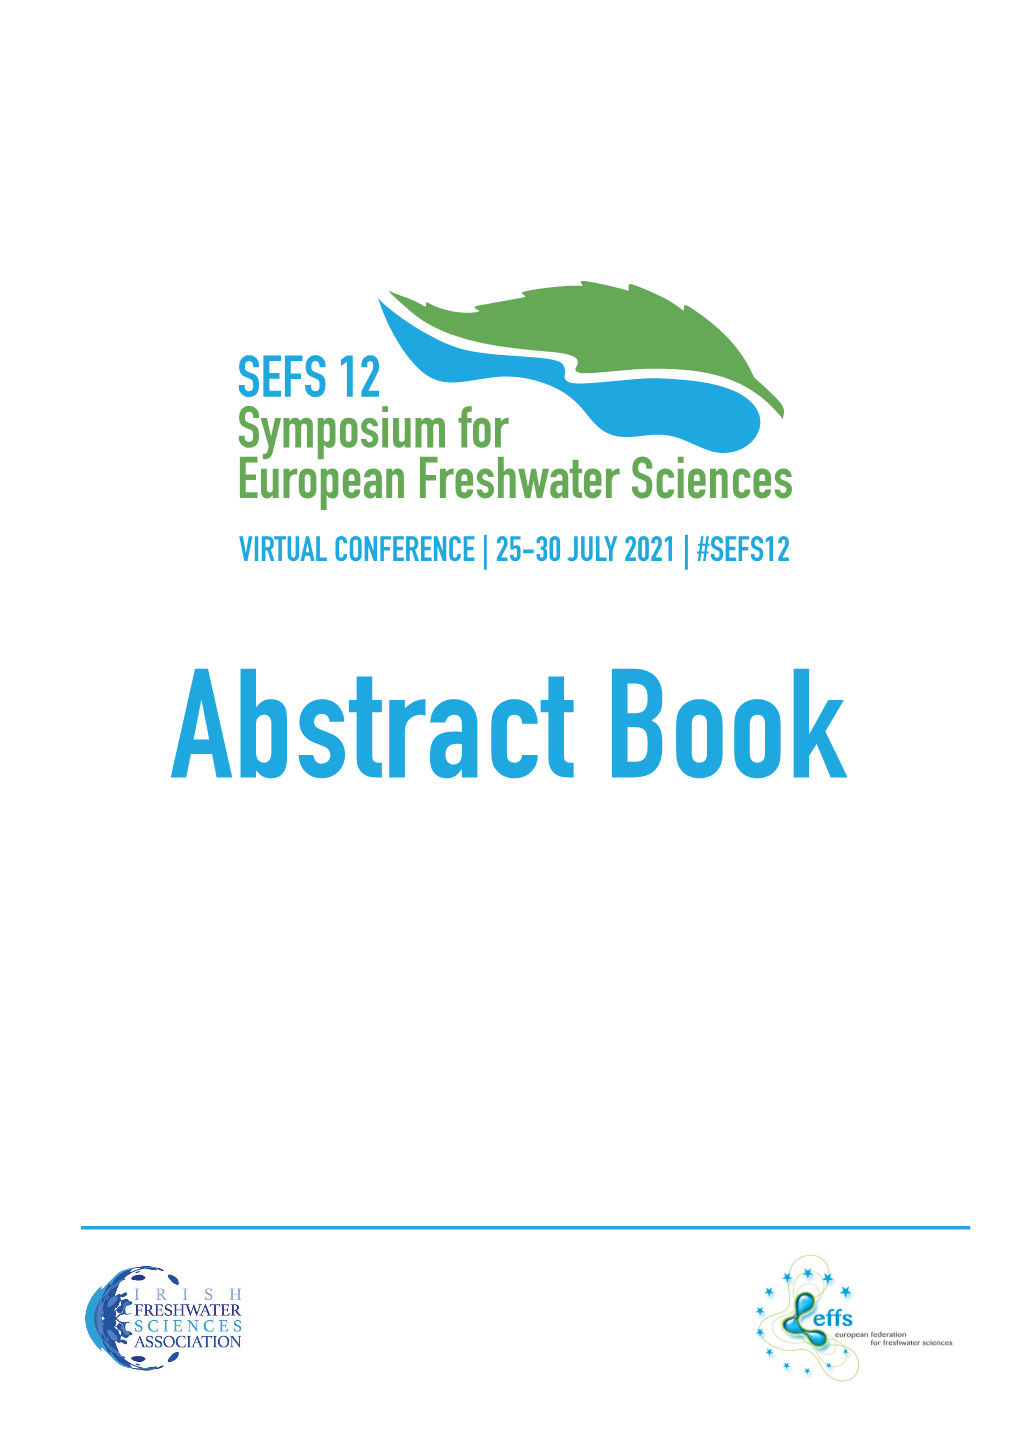 SEFS 12 Symposium for European Freshwater Sciences VIRTUAL CONFERENCE | 25-30 JULY 2021 | #SEFS12 Abstract Book